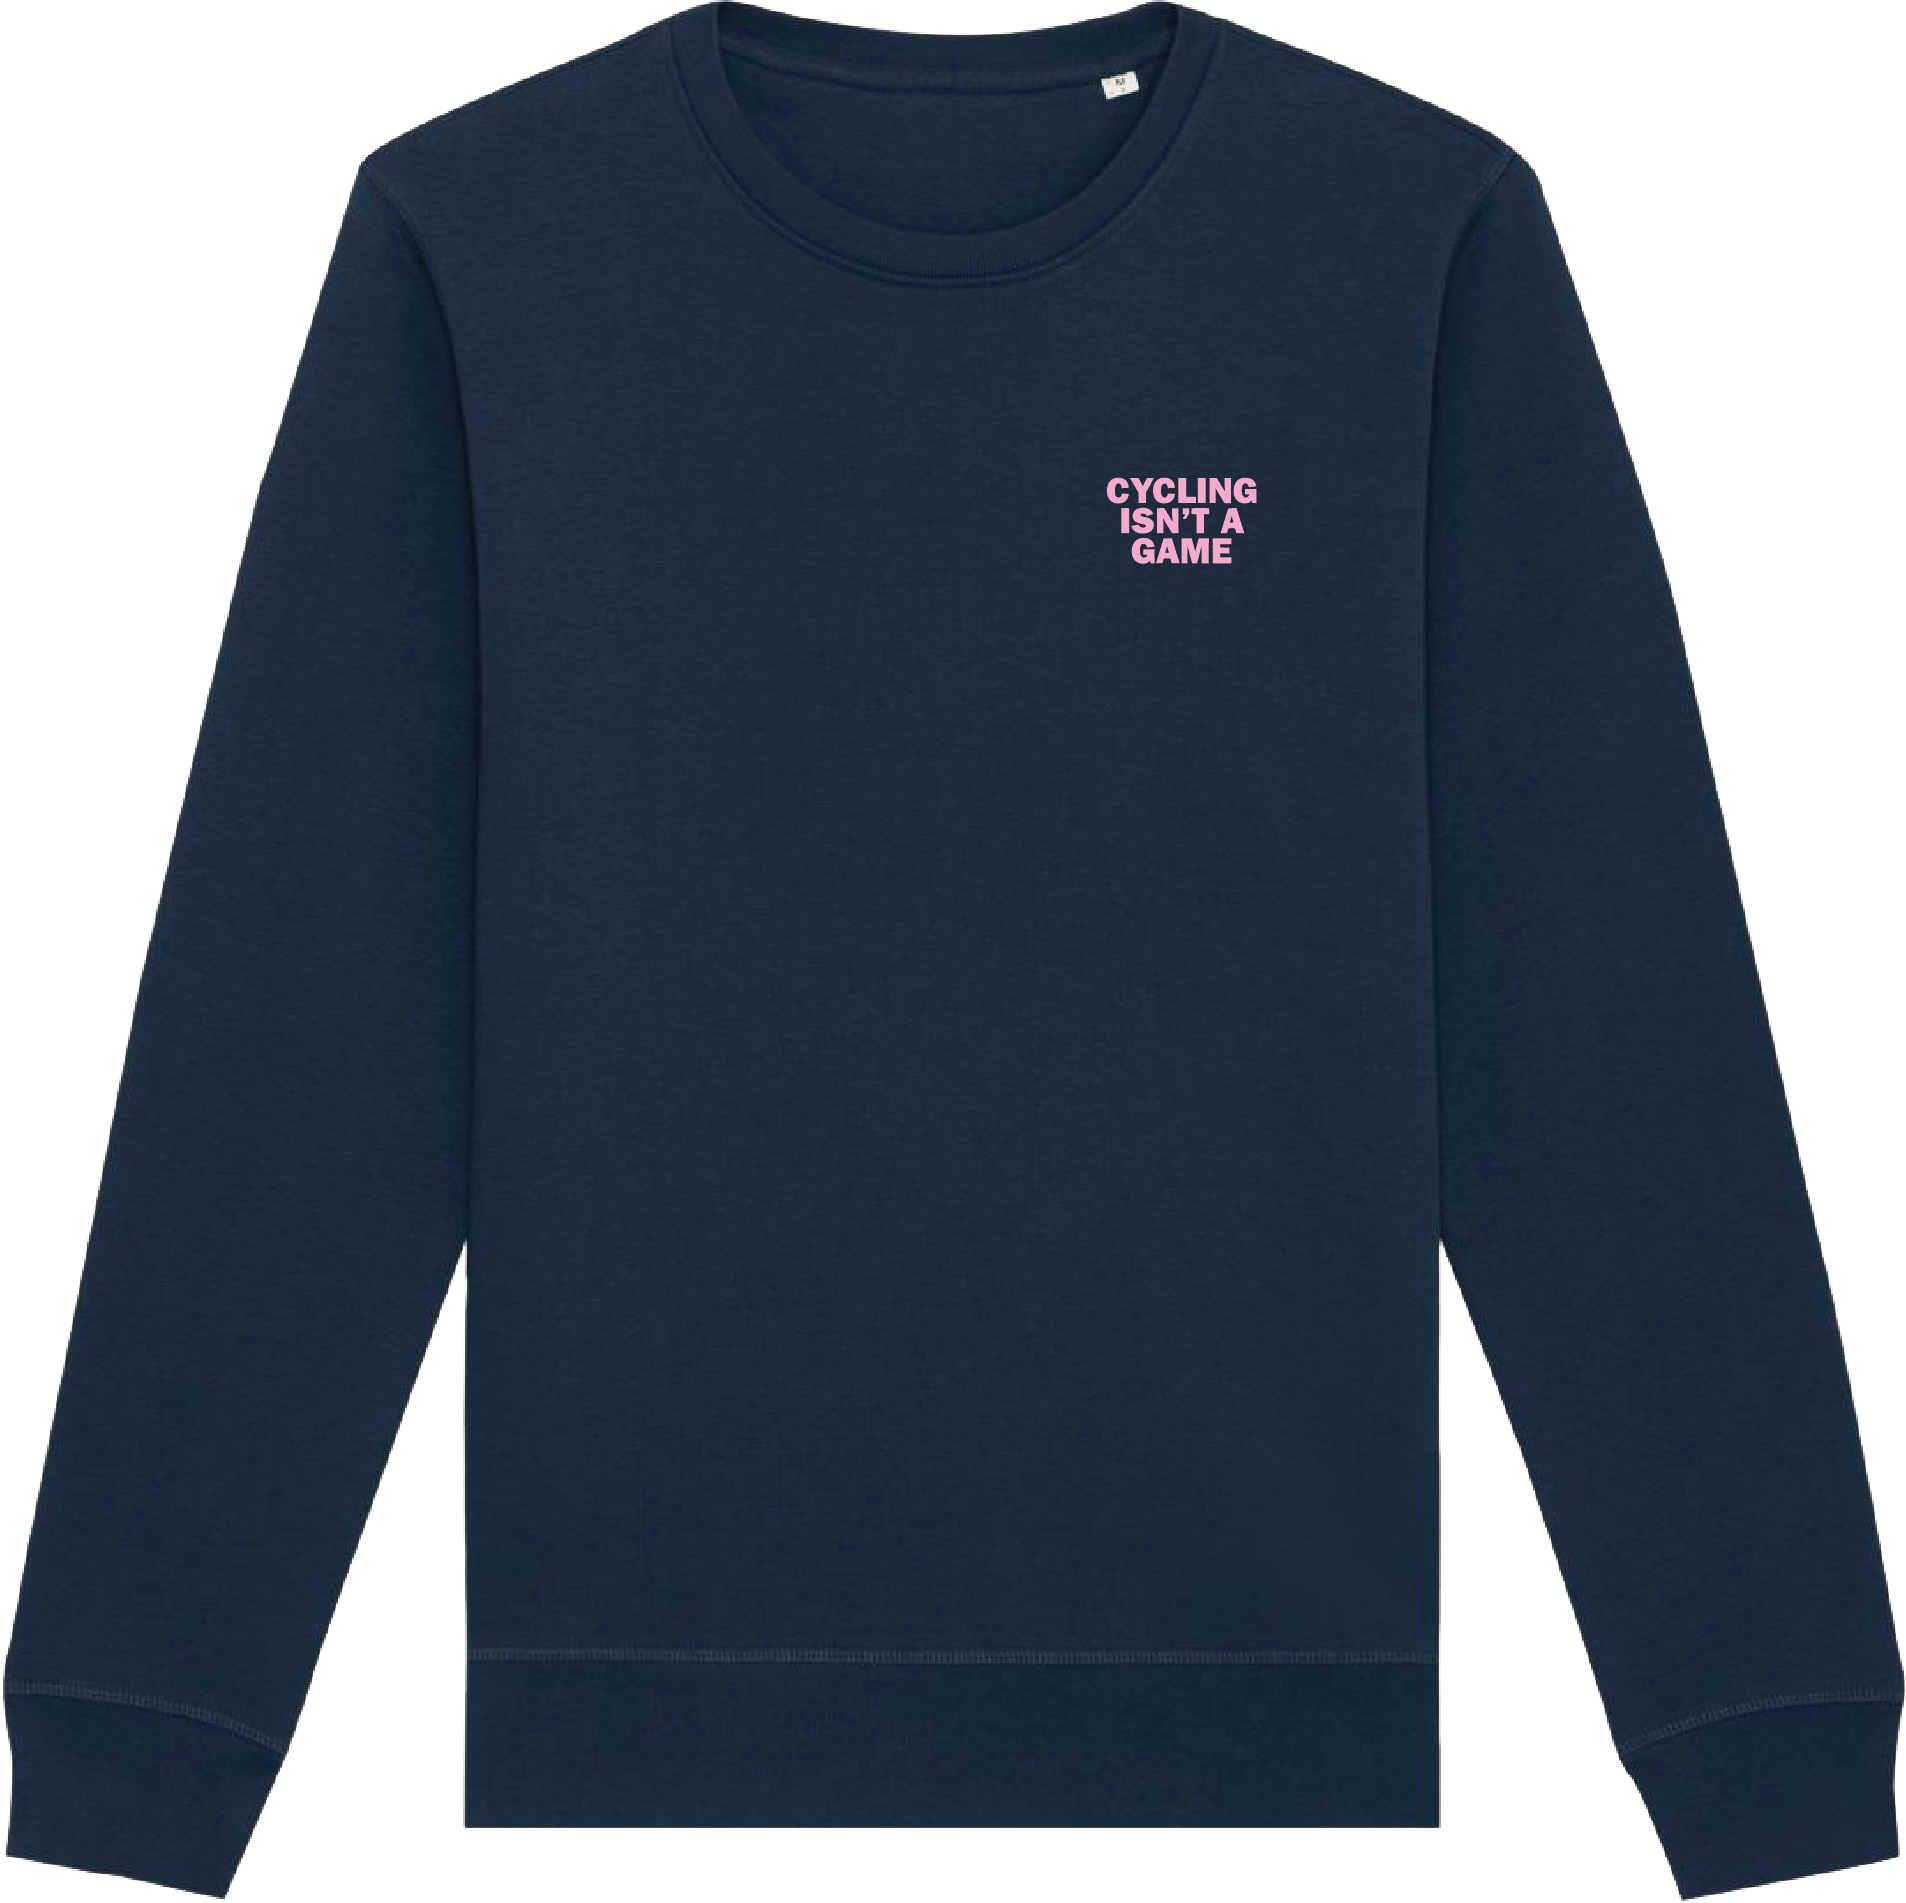 Cycling isn't a game unisex cycling Sweater (navy - pink)